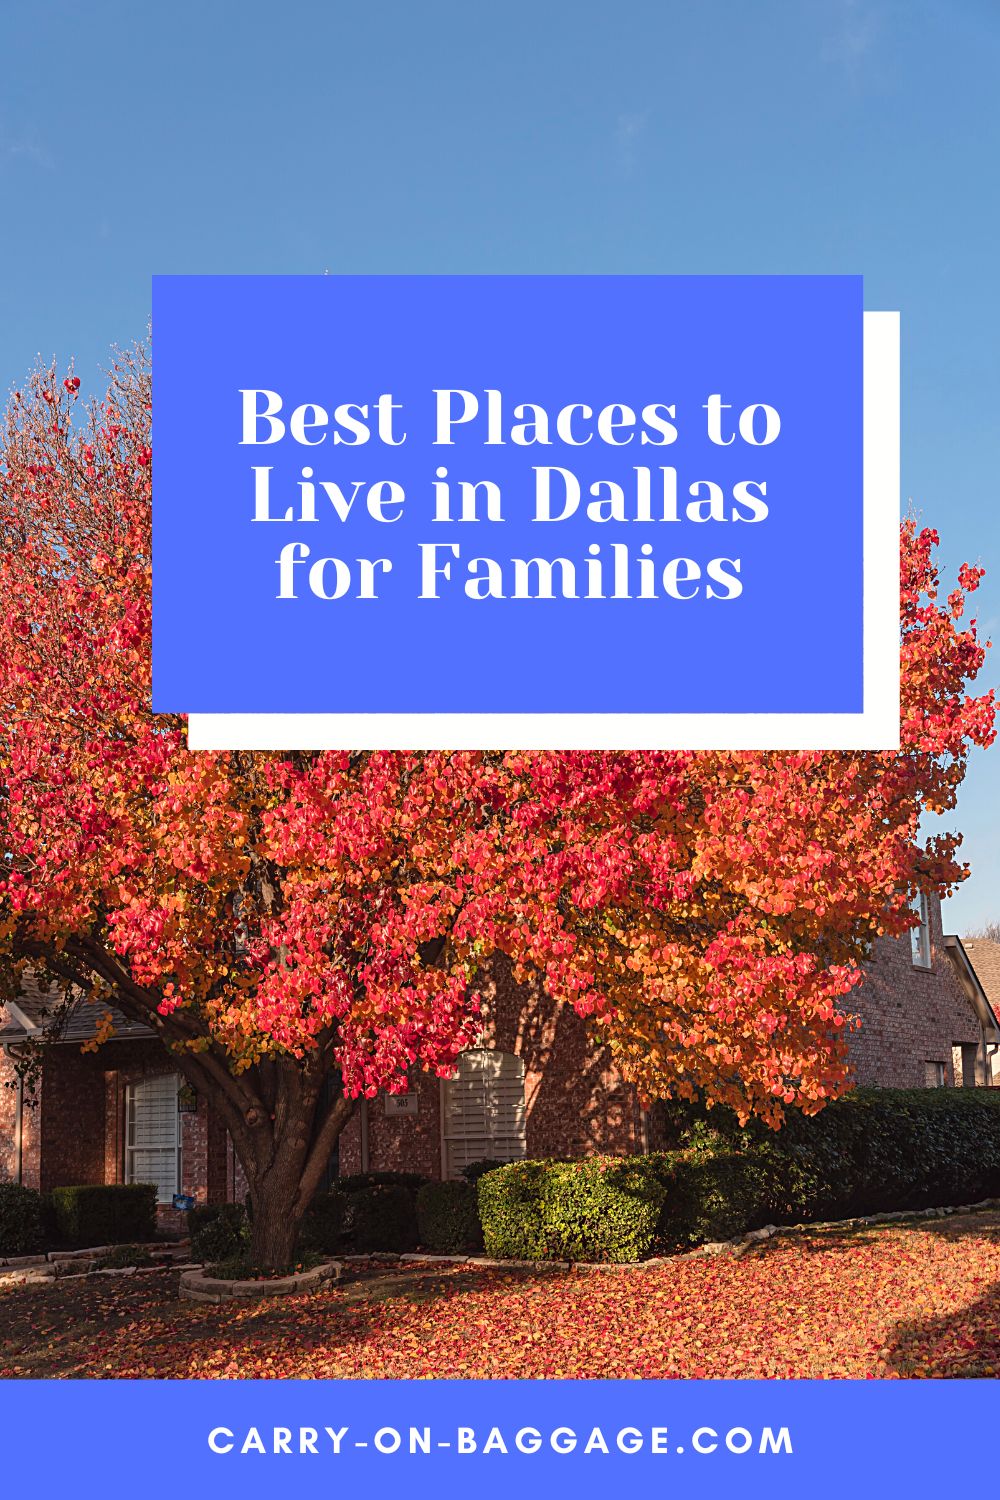 Best Areas to Live in Dallas For Families